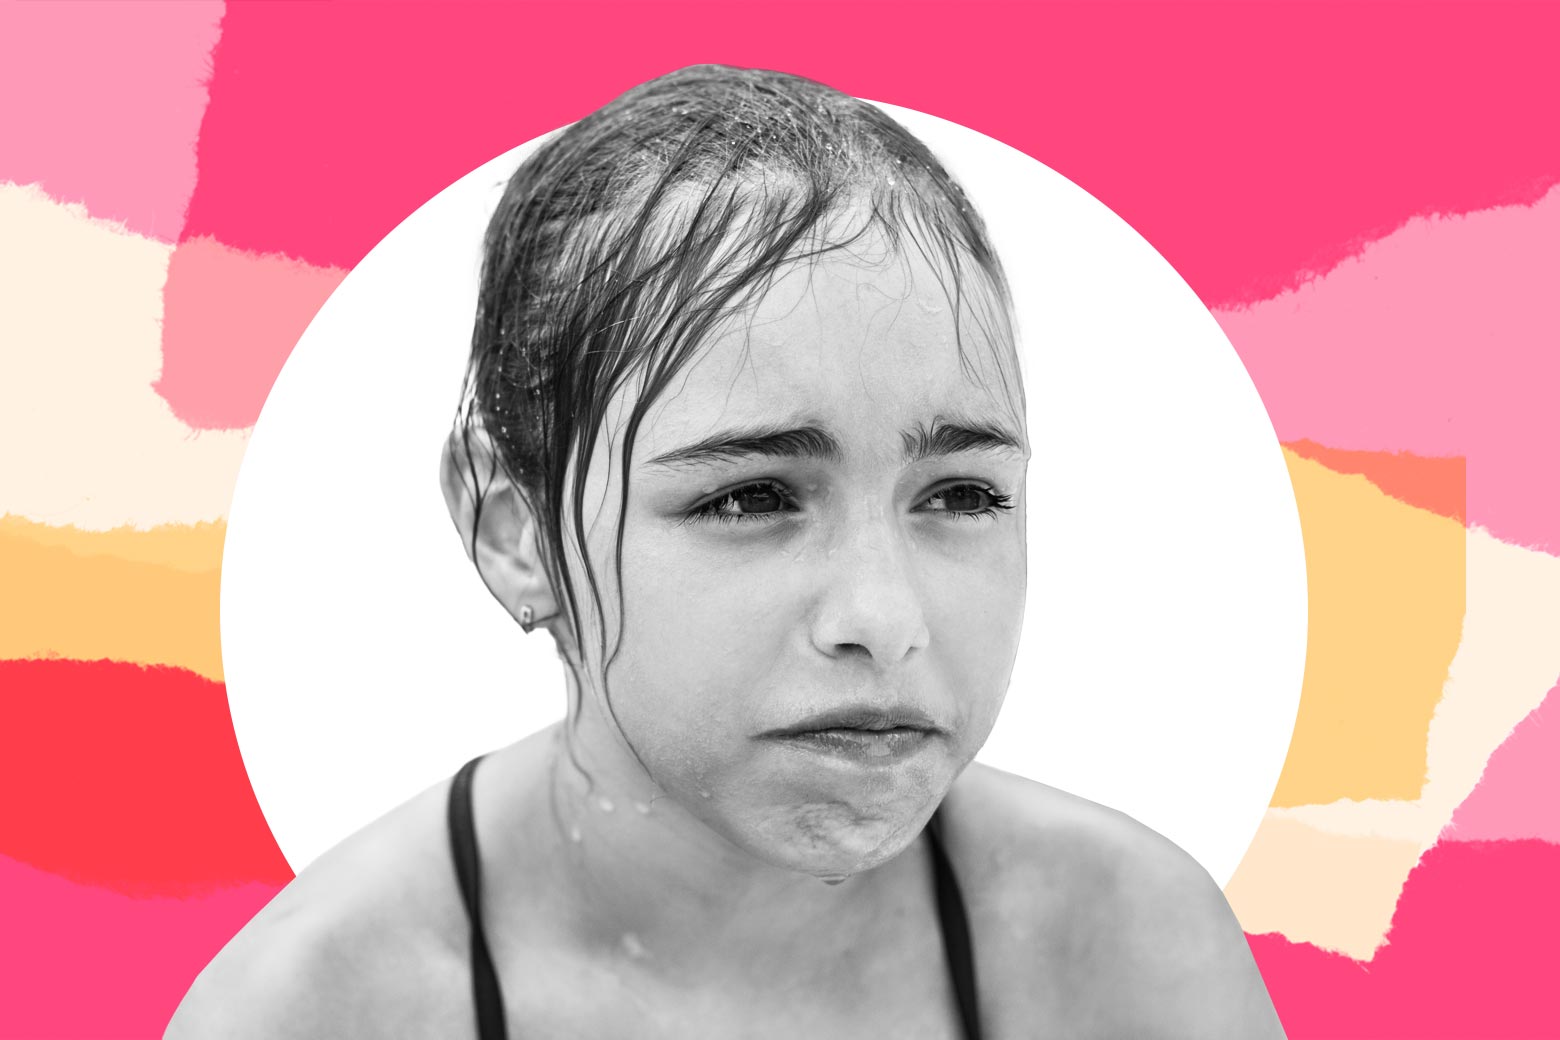 A young girl, having just gone swimming, looks upset.